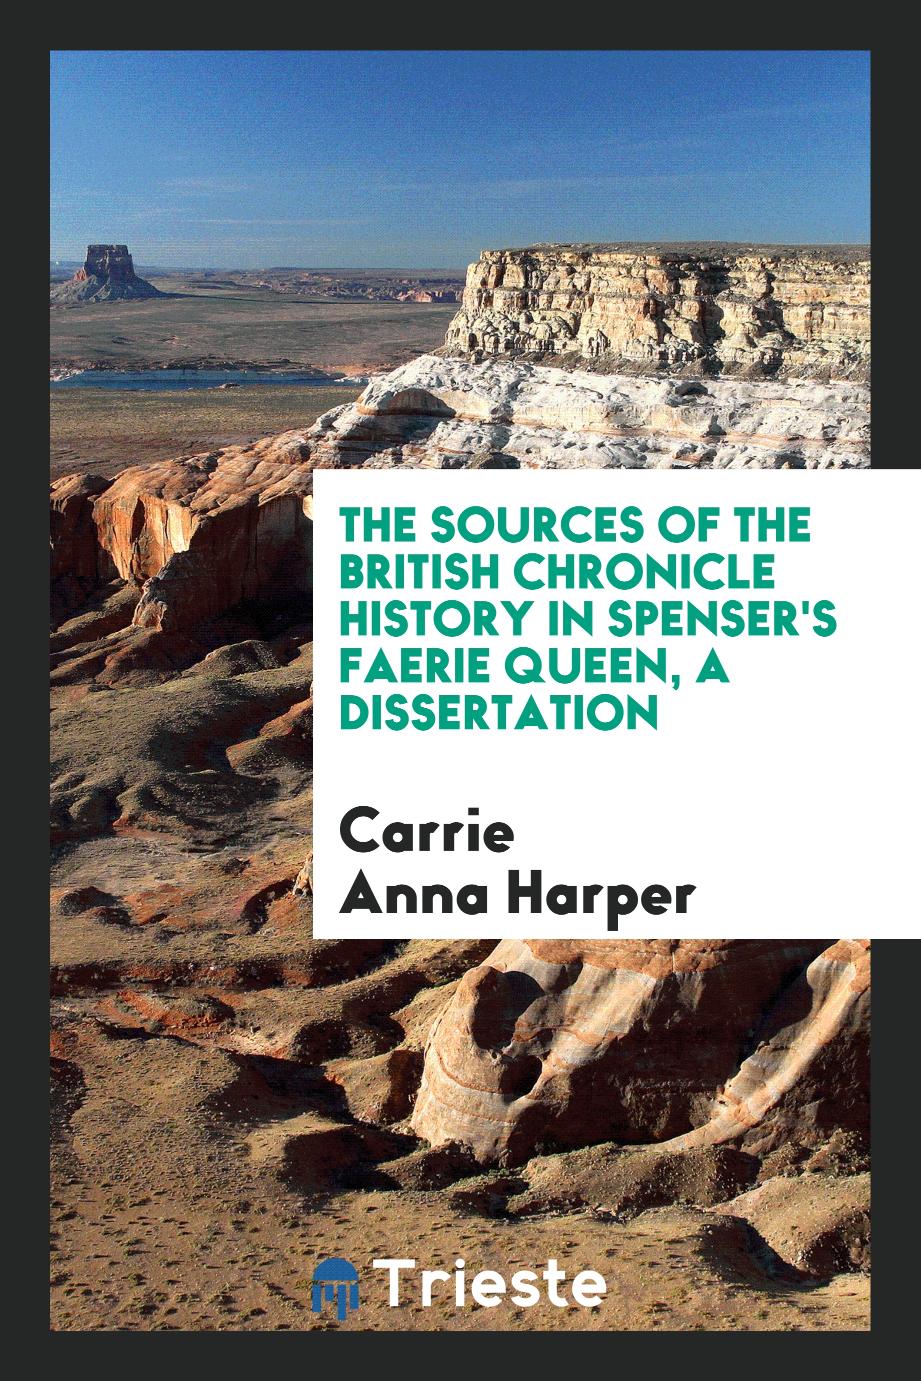 The sources of the British chronicle history in Spenser's Faerie queen, a dissertation